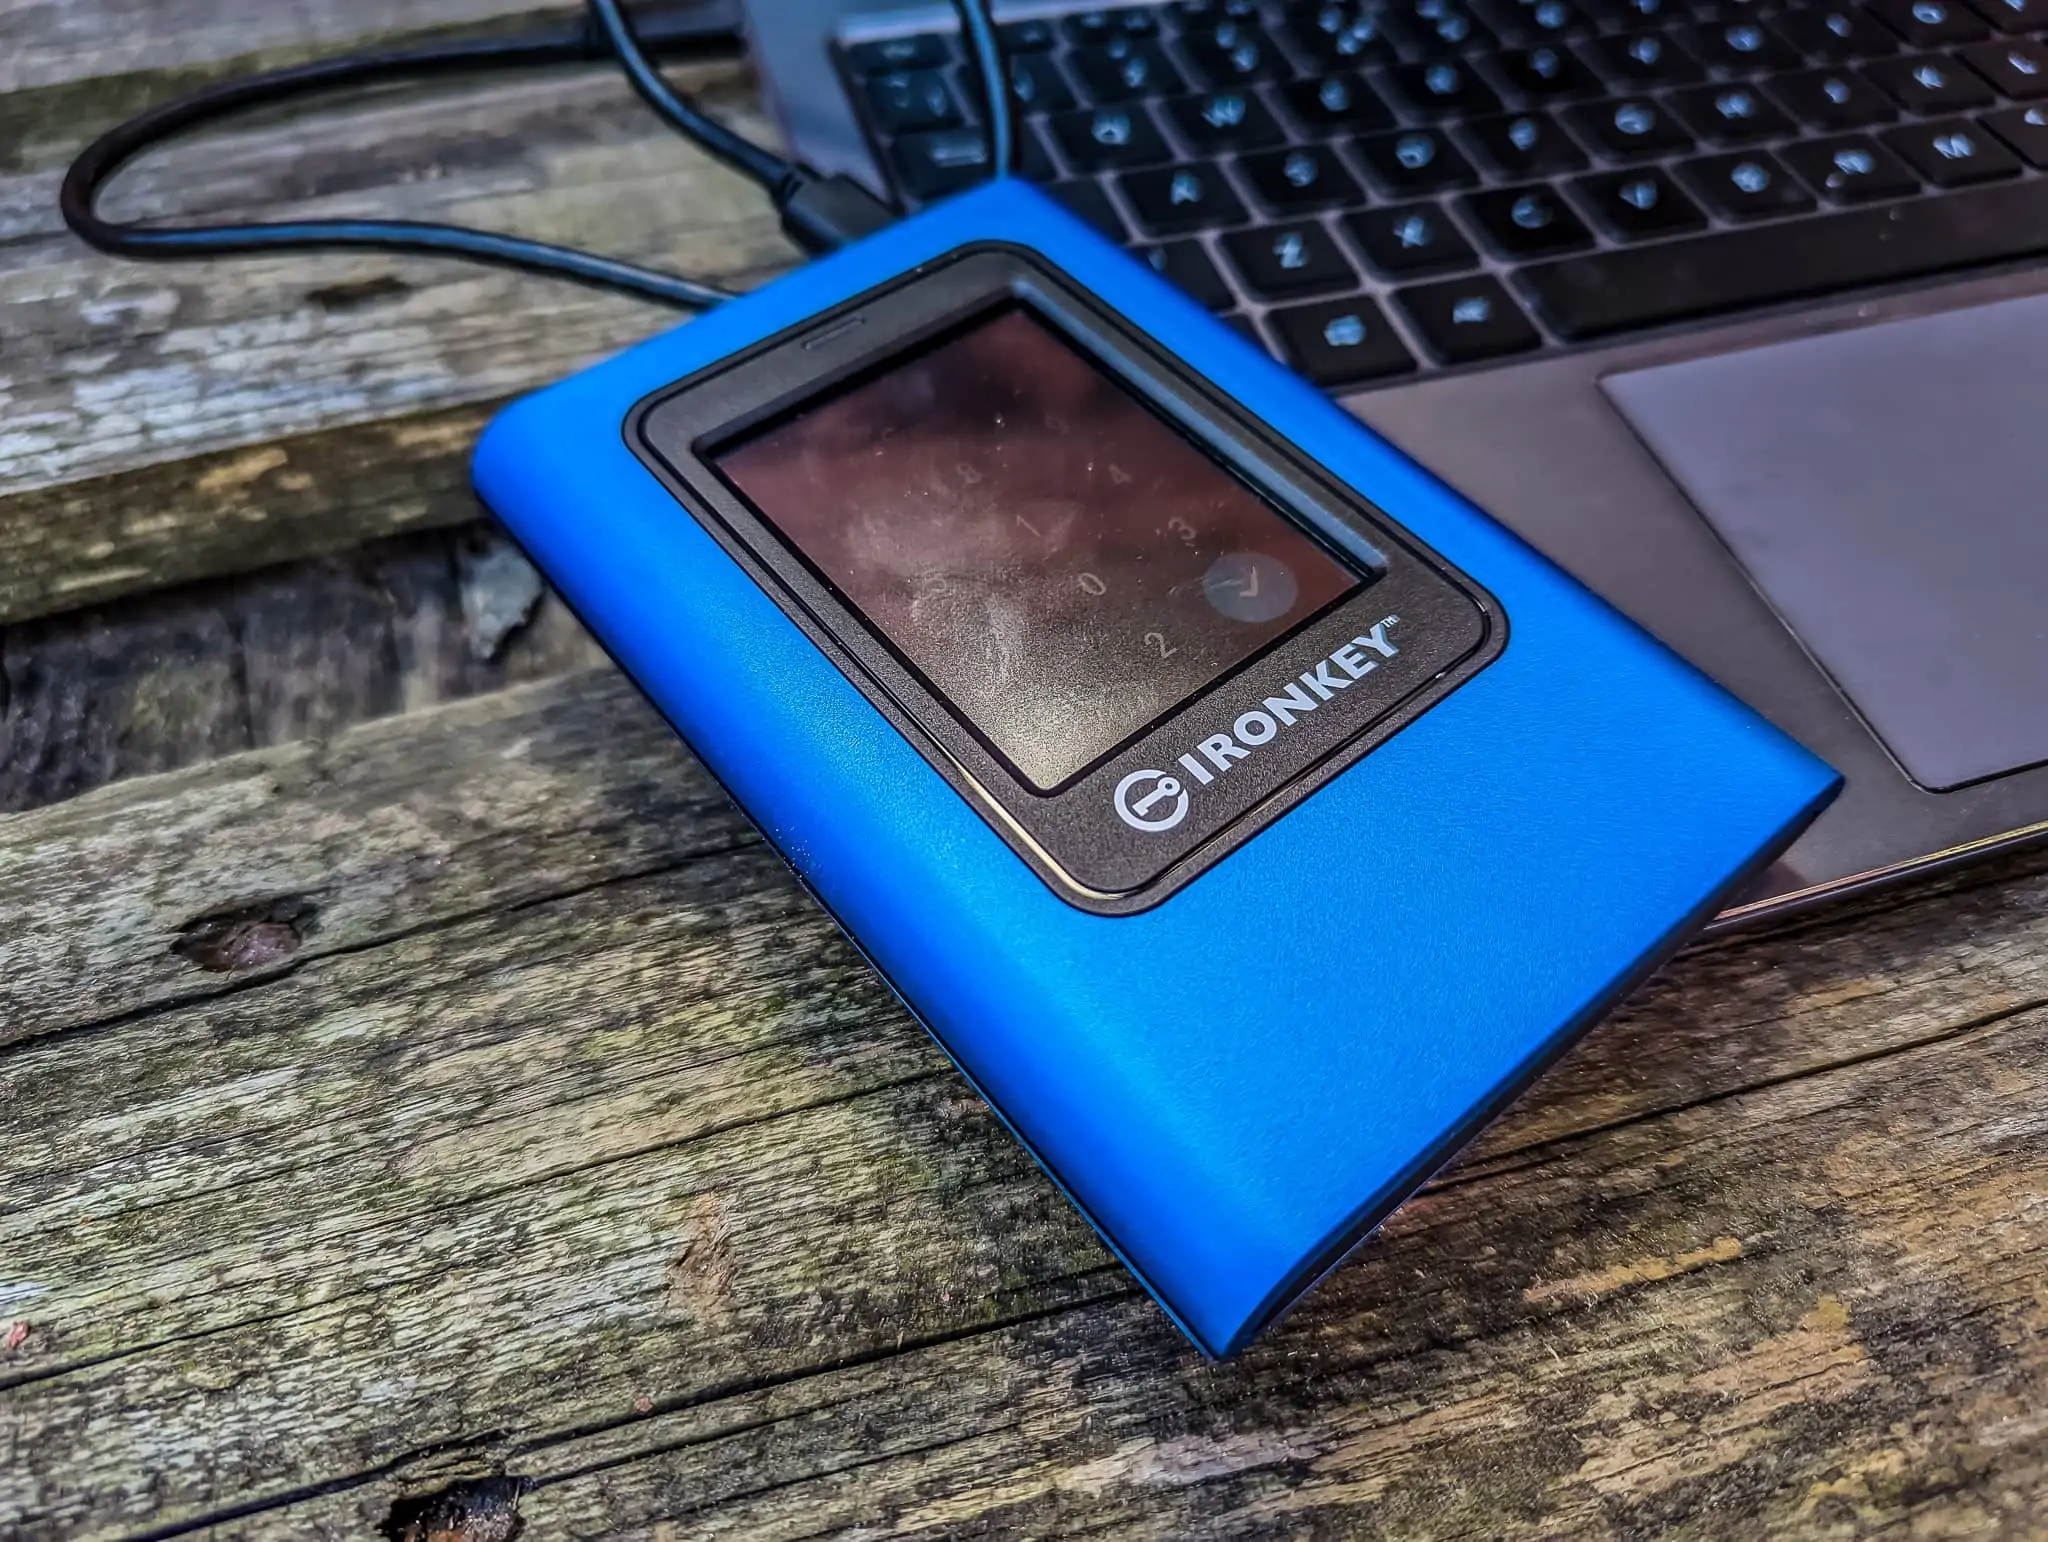 Kingston IronKey Vault Privacy 80 External SSD Review – A FIPS 197 encrypted SSD with touch screen display